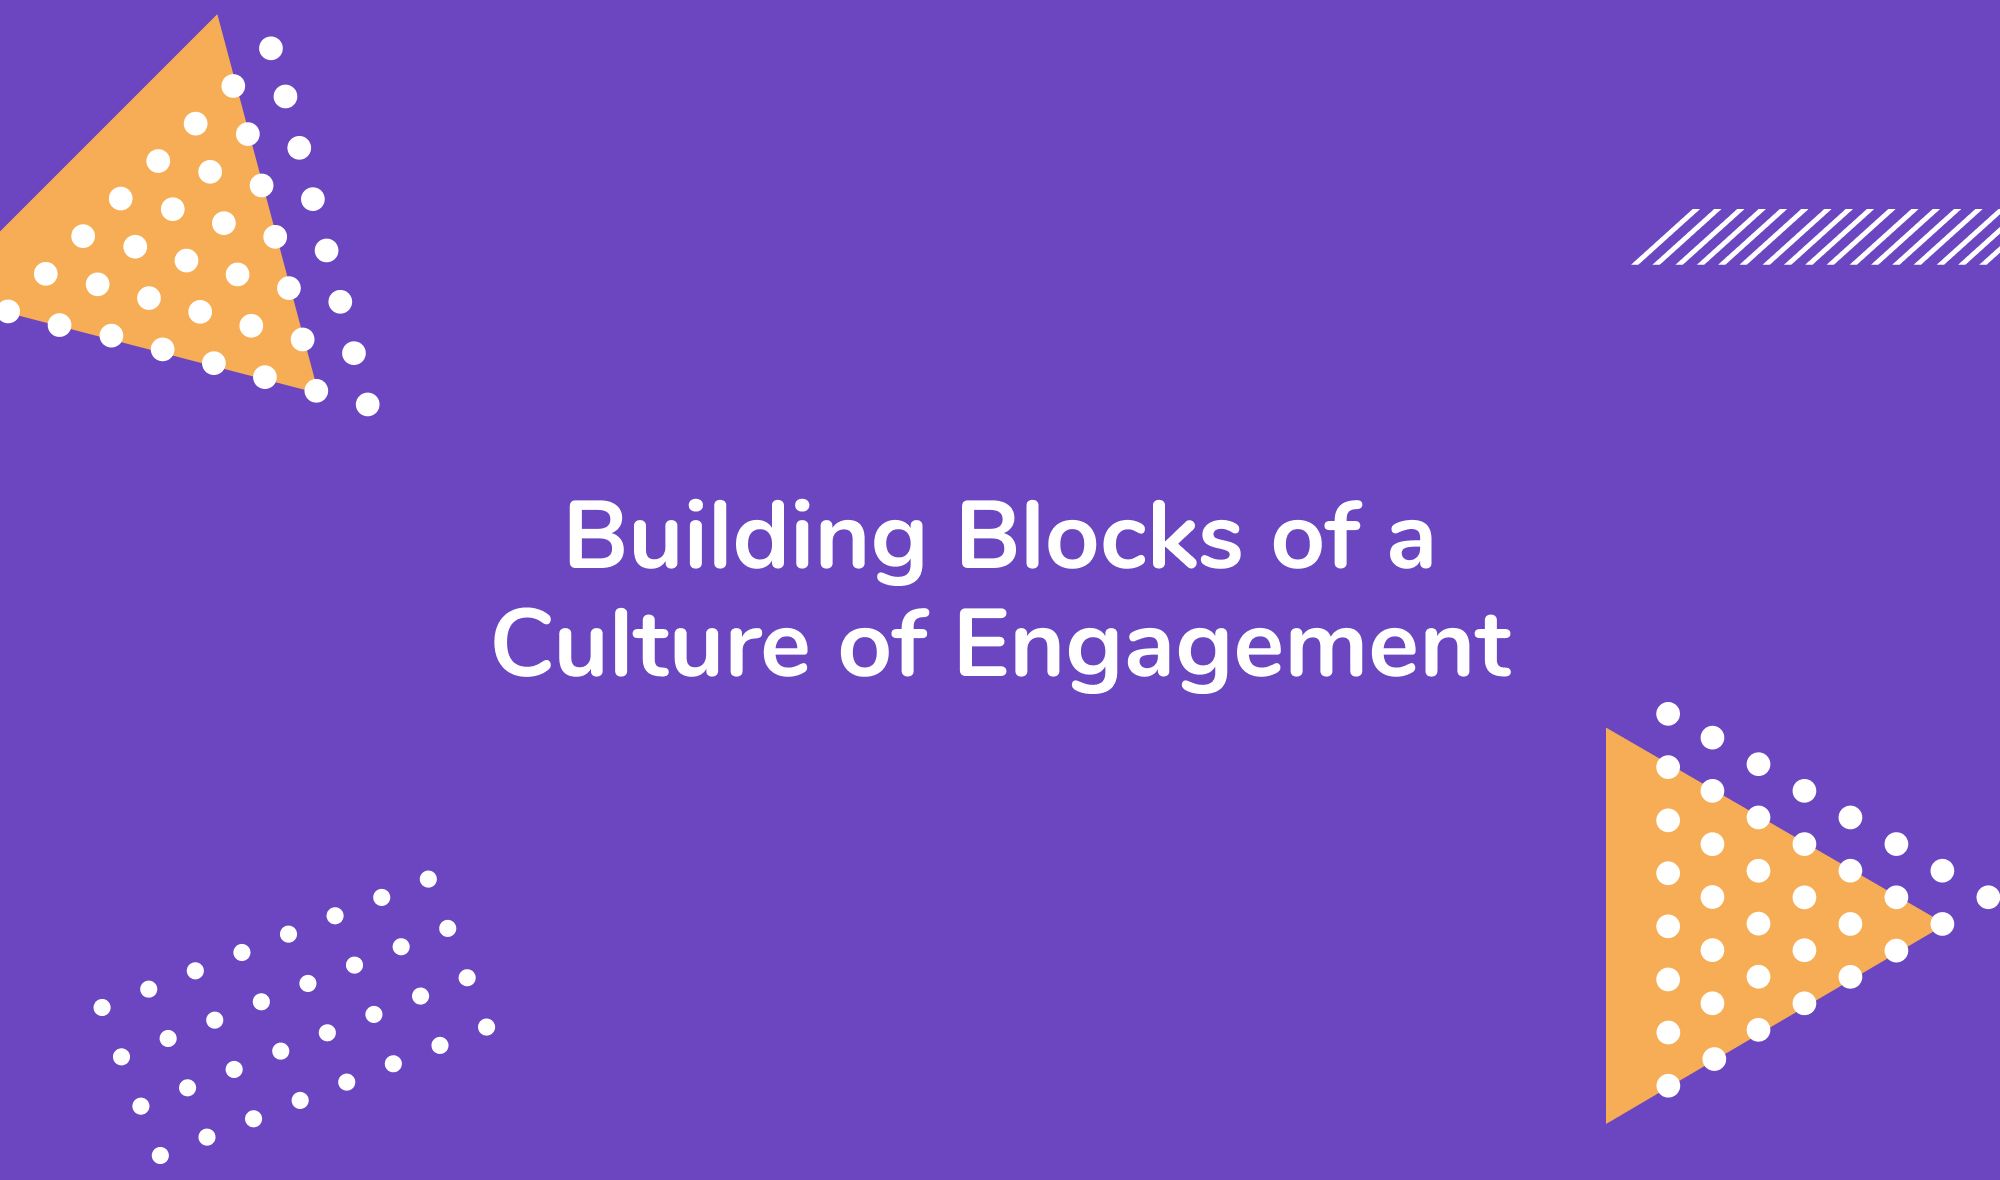 Building Blocks of a Culture of Engagement